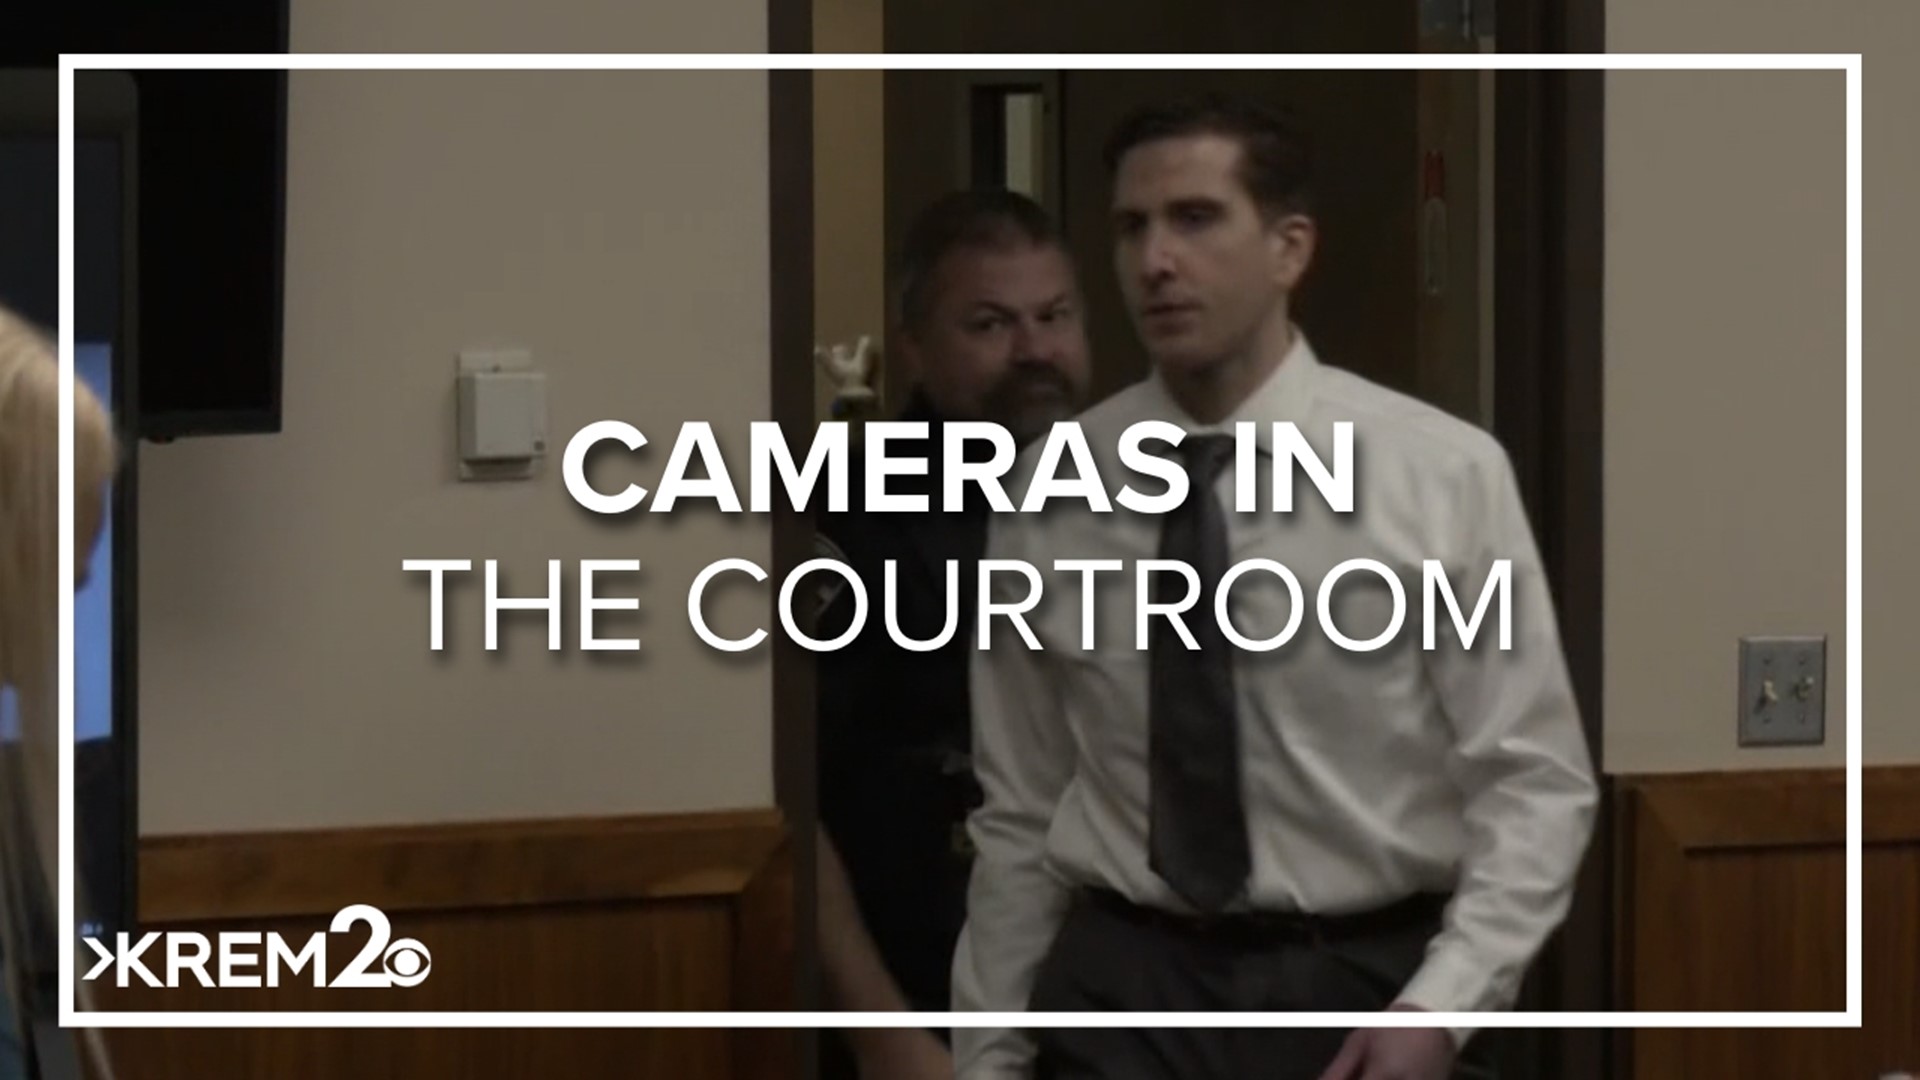 Judge John C. Judge said more work had to be done to determine a ruling for cameras in the courtroom during Wednesday's hearing.